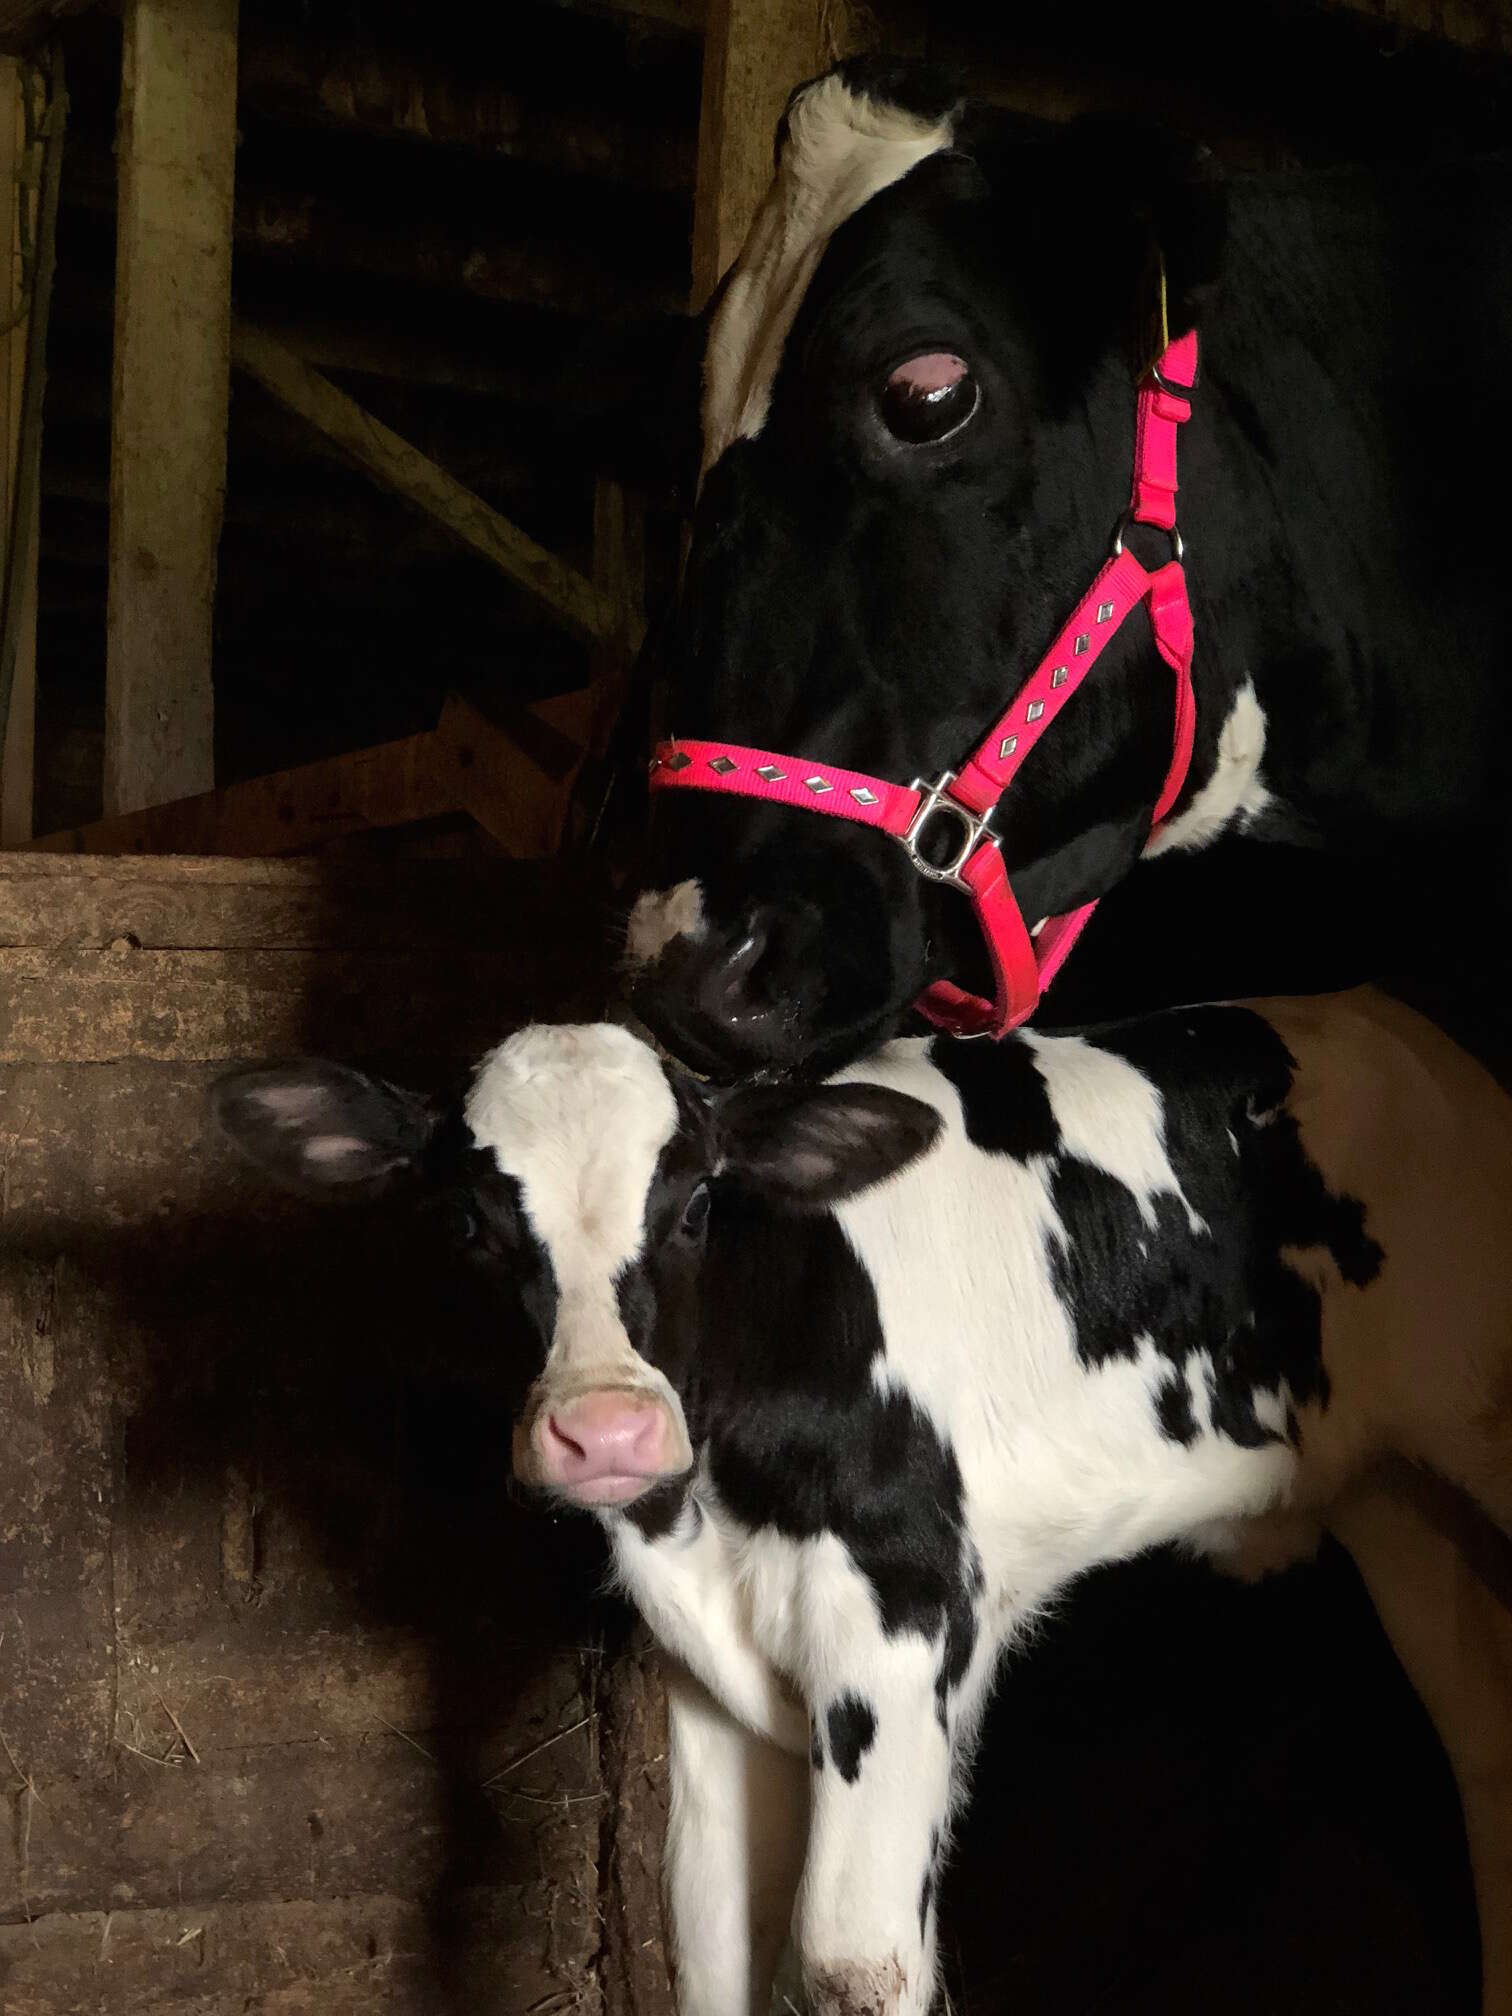 Cow and calf saved from dairy farm